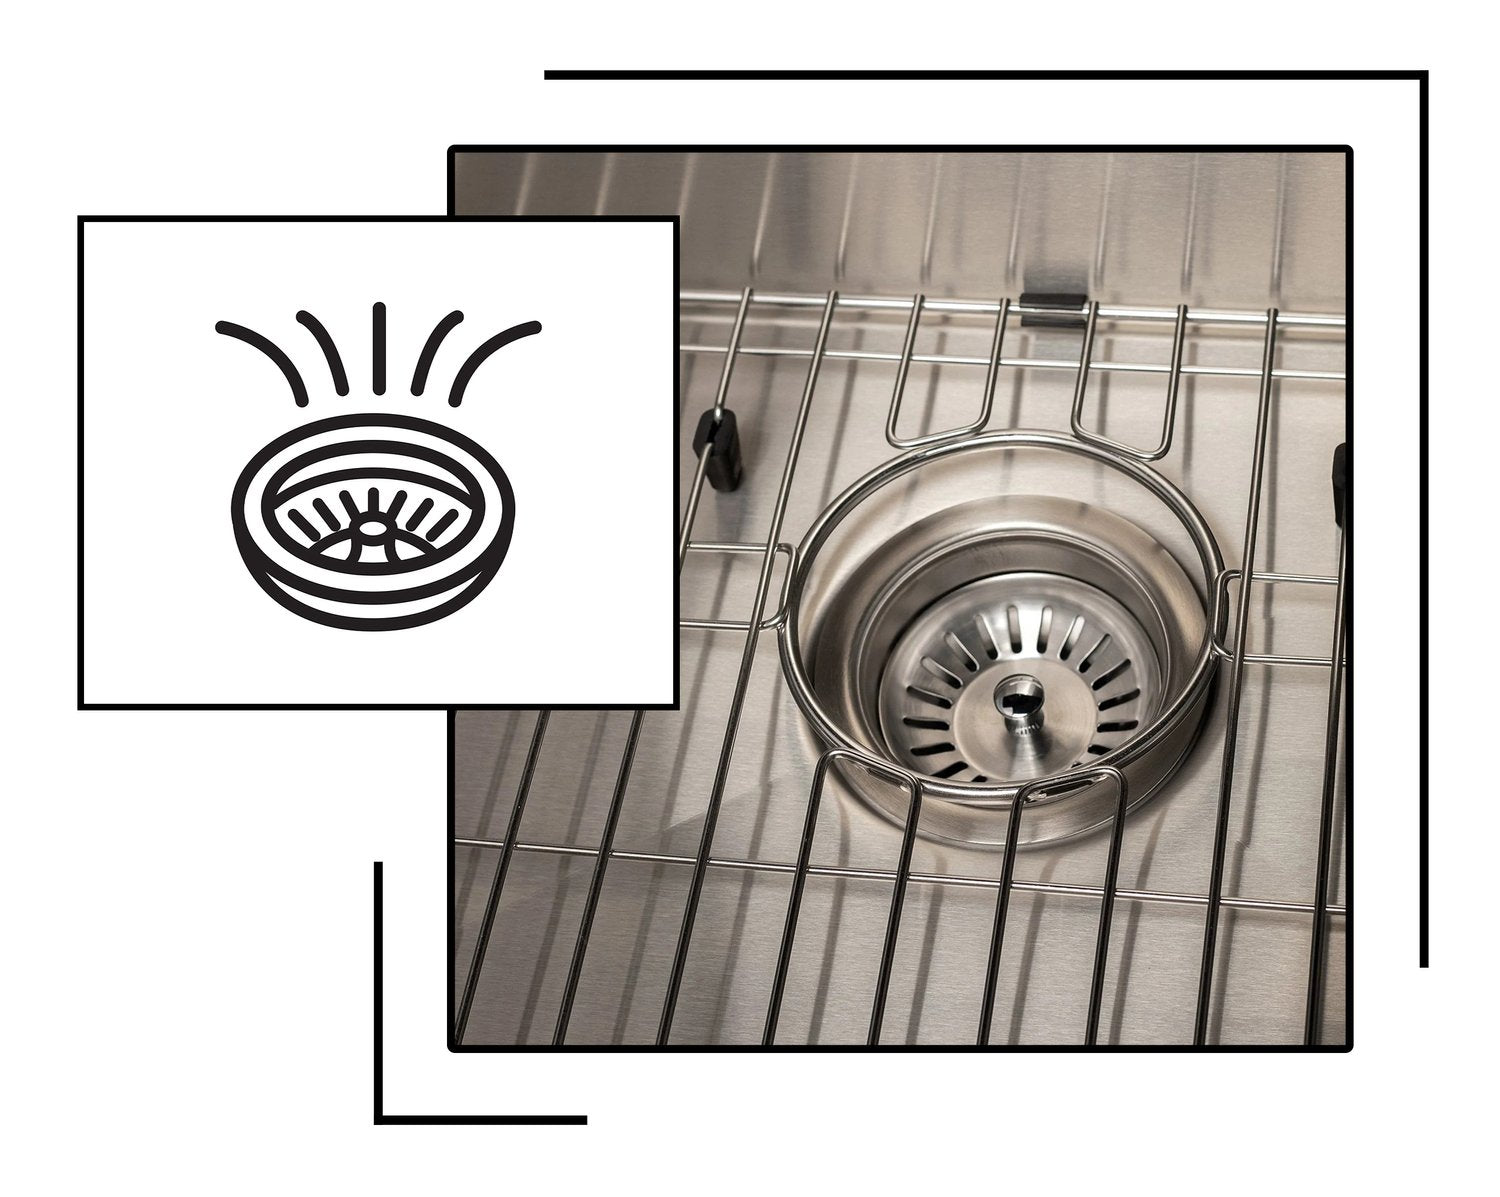 Icon and image representing superior sink drainage